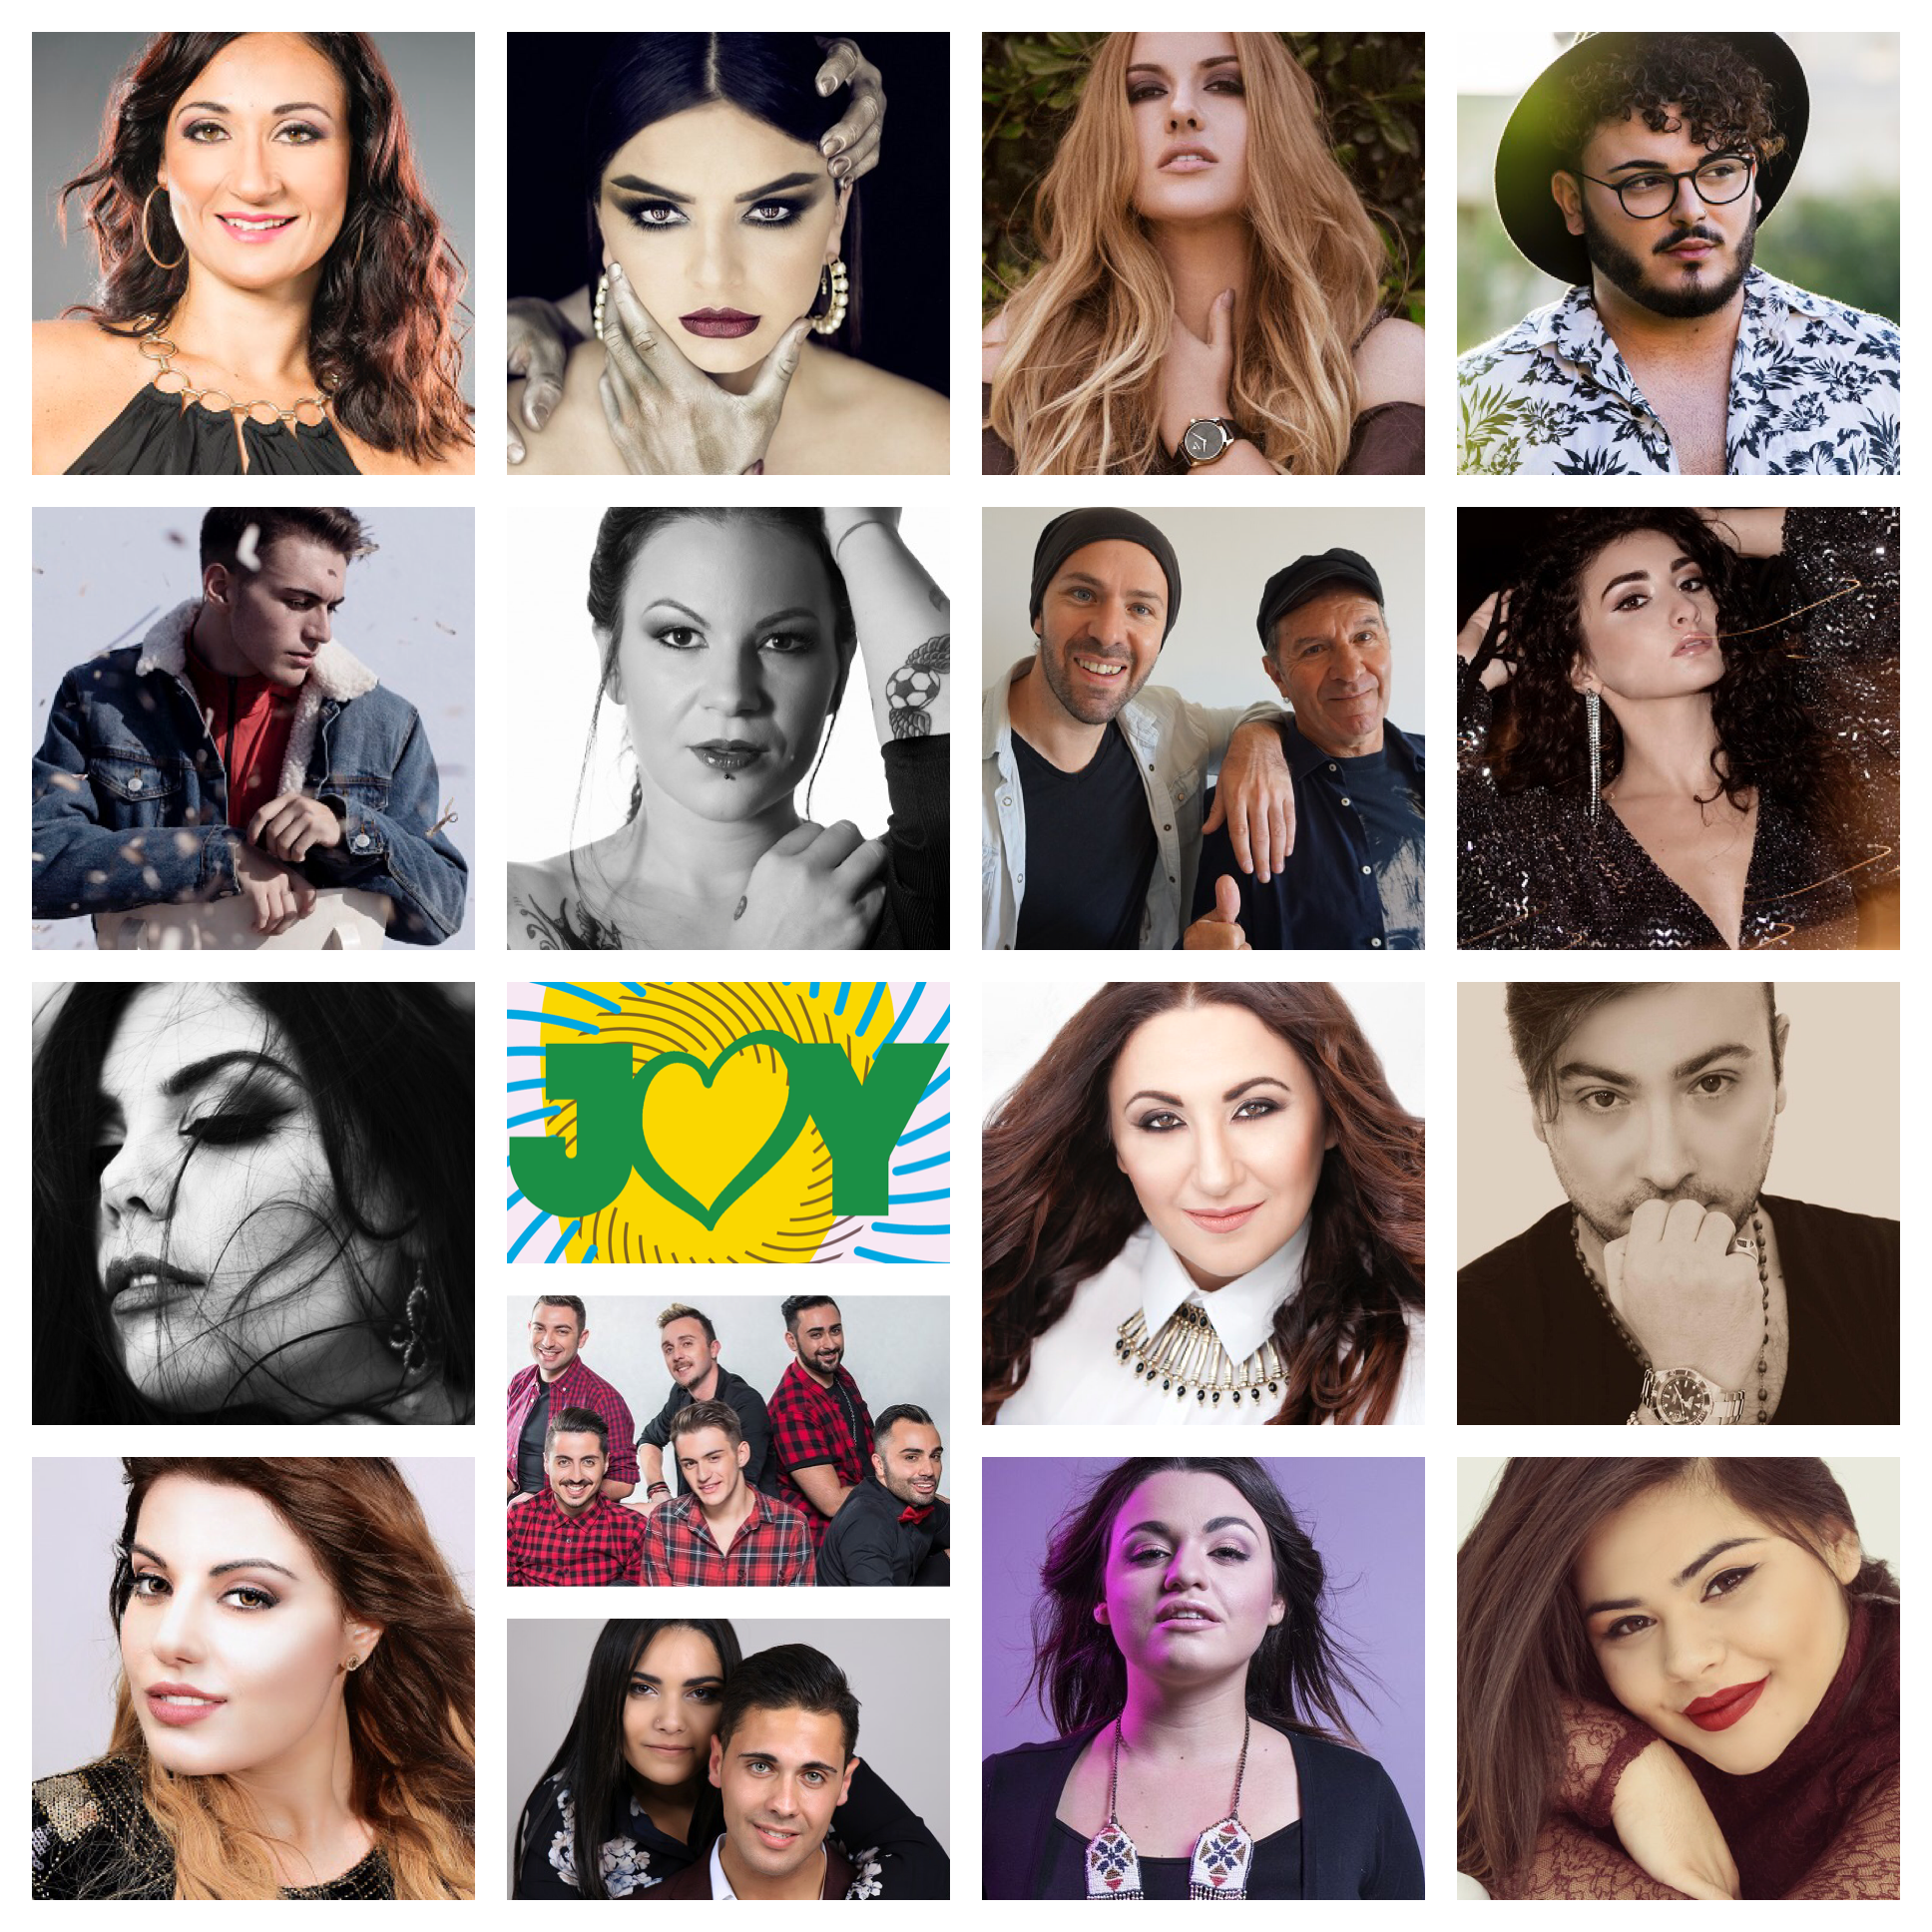 Previewing the 2018 Malta Eurovision Song Contest